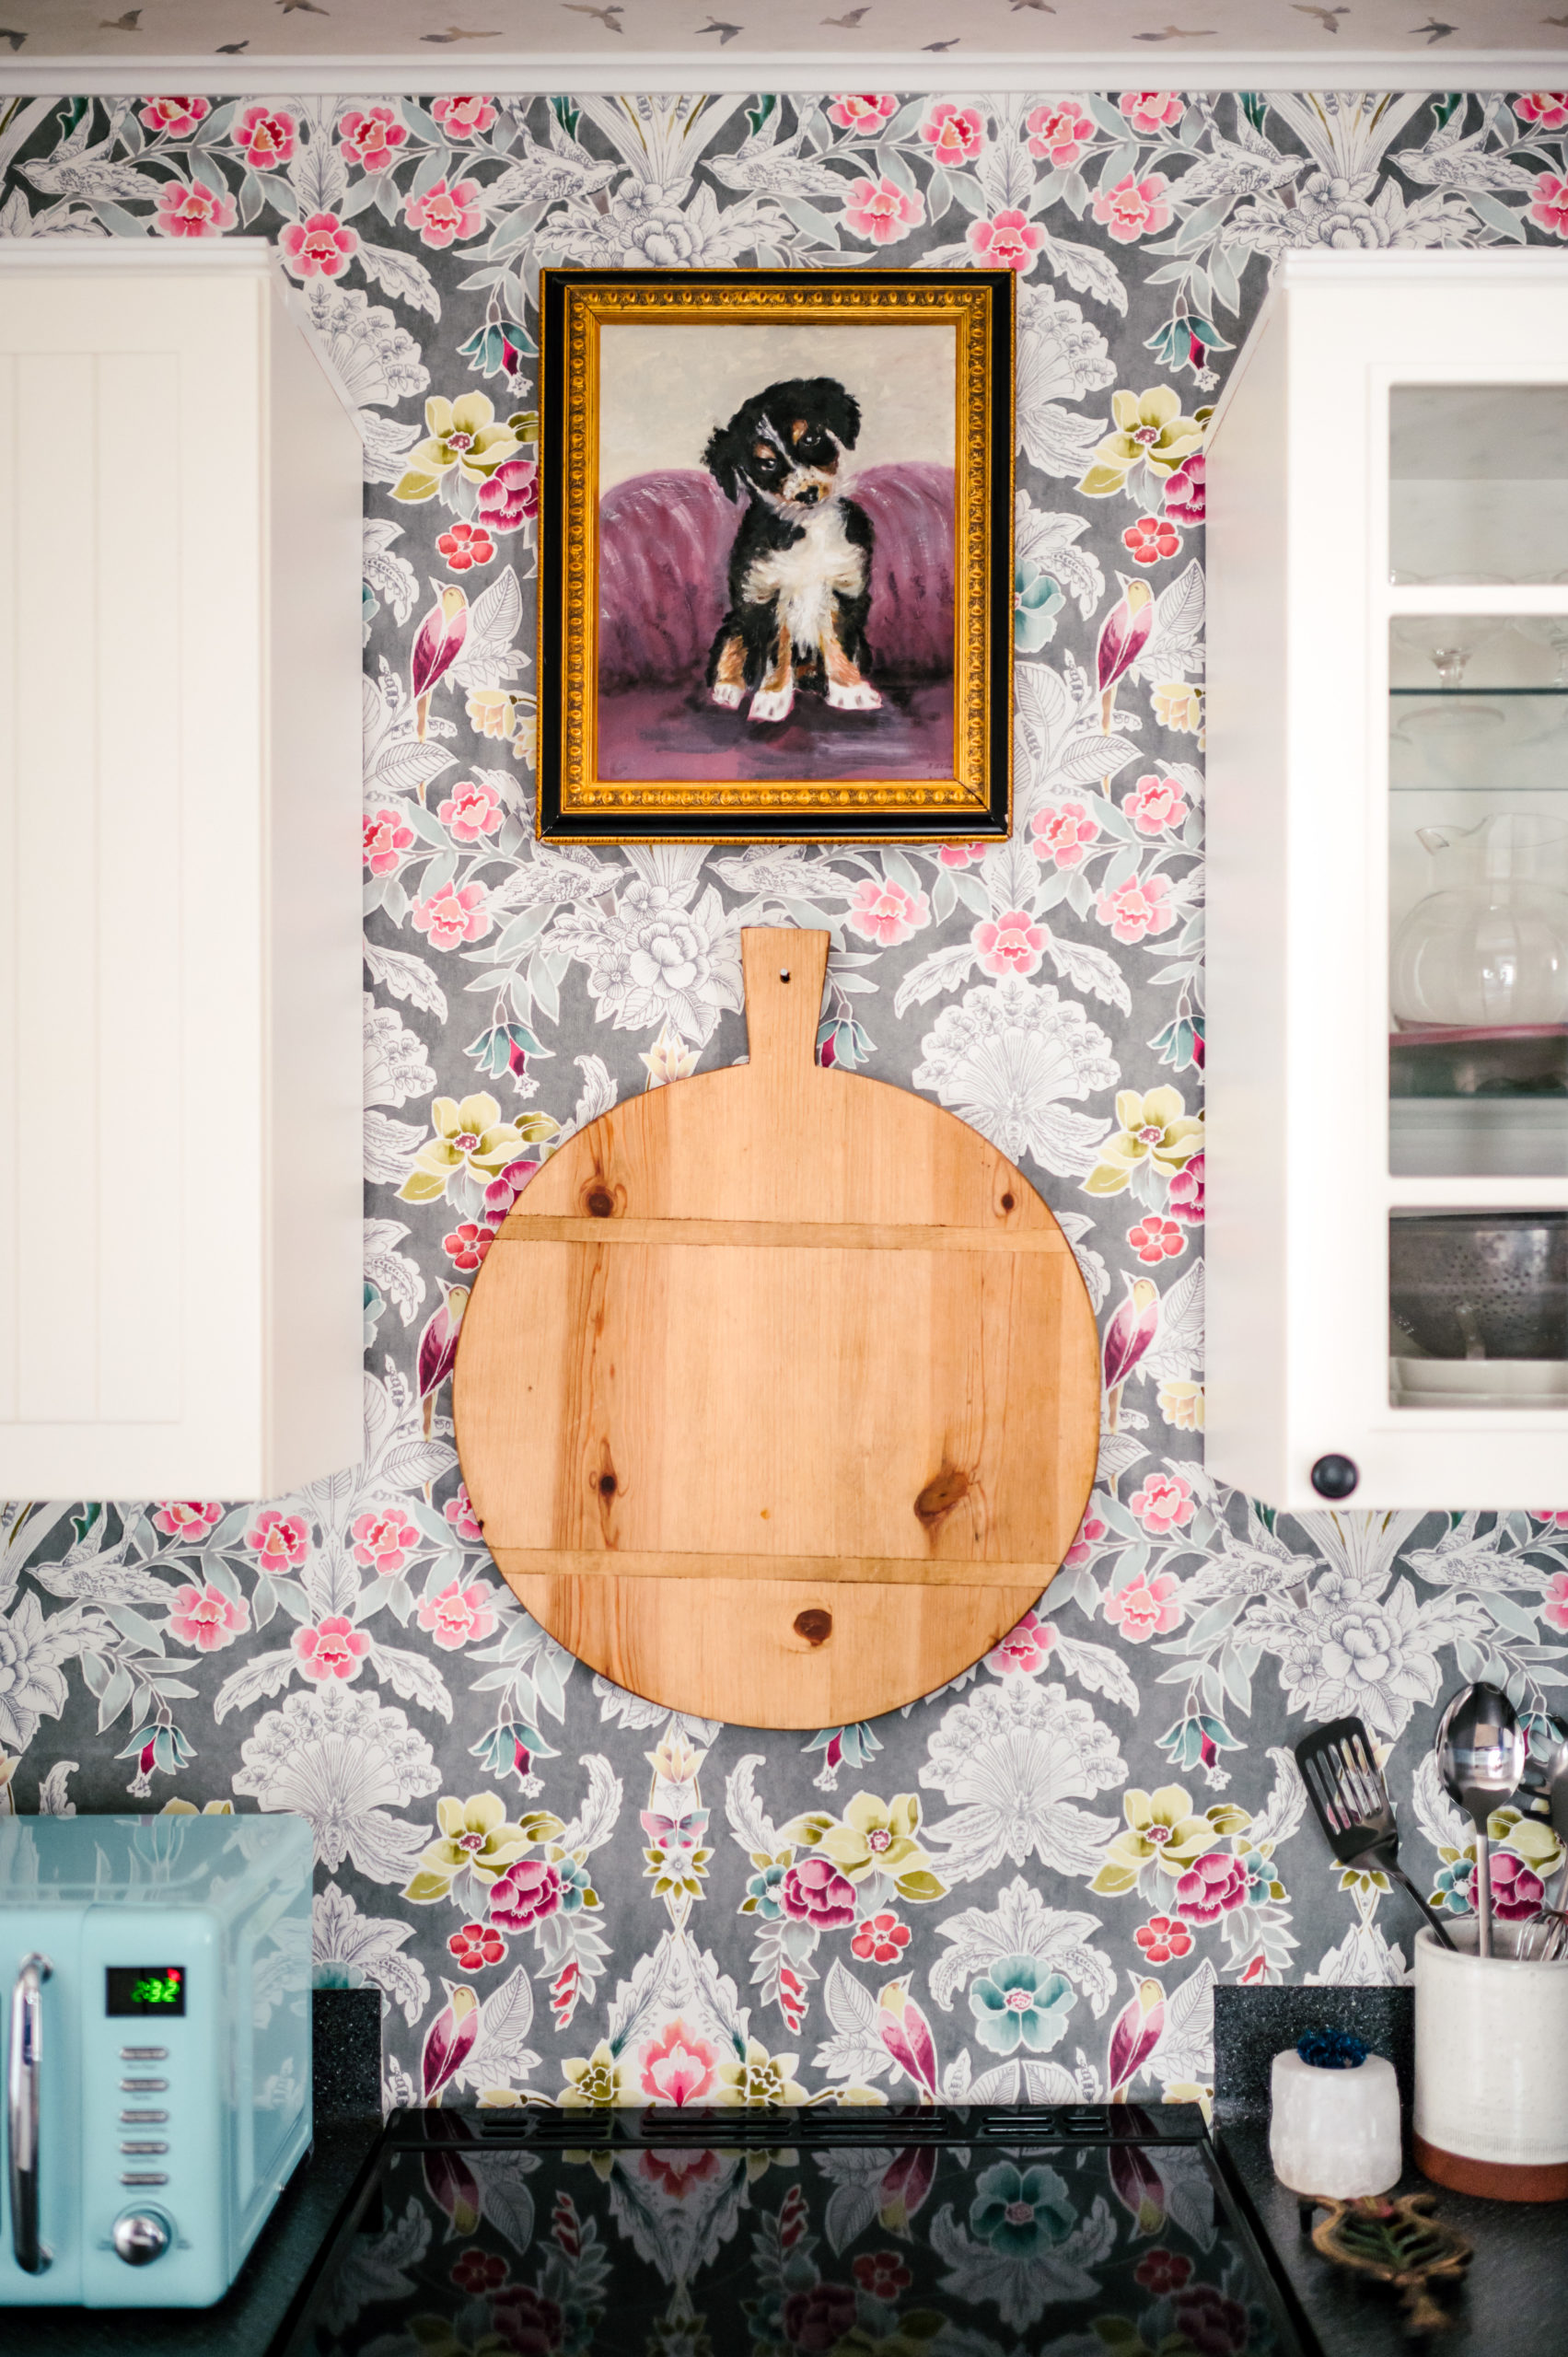 Short-term Rental Photos of kitchen wall with colorful floral wallpaper and cutting board hanging underneath a frame of a puppy